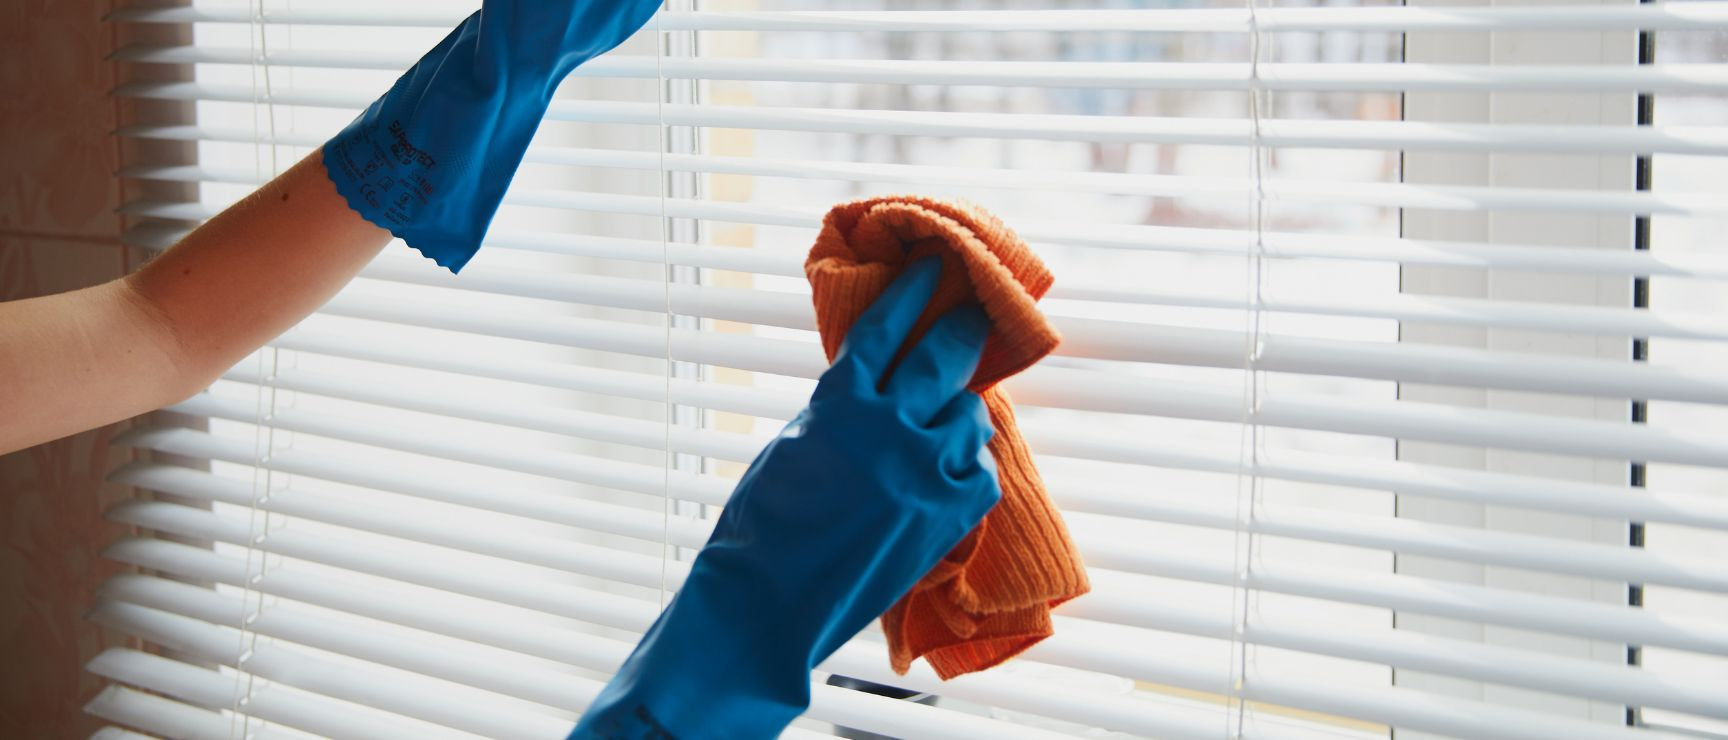 Clean your Venetian window blinds using feather duster, microfiber cloth, or dryer sheets